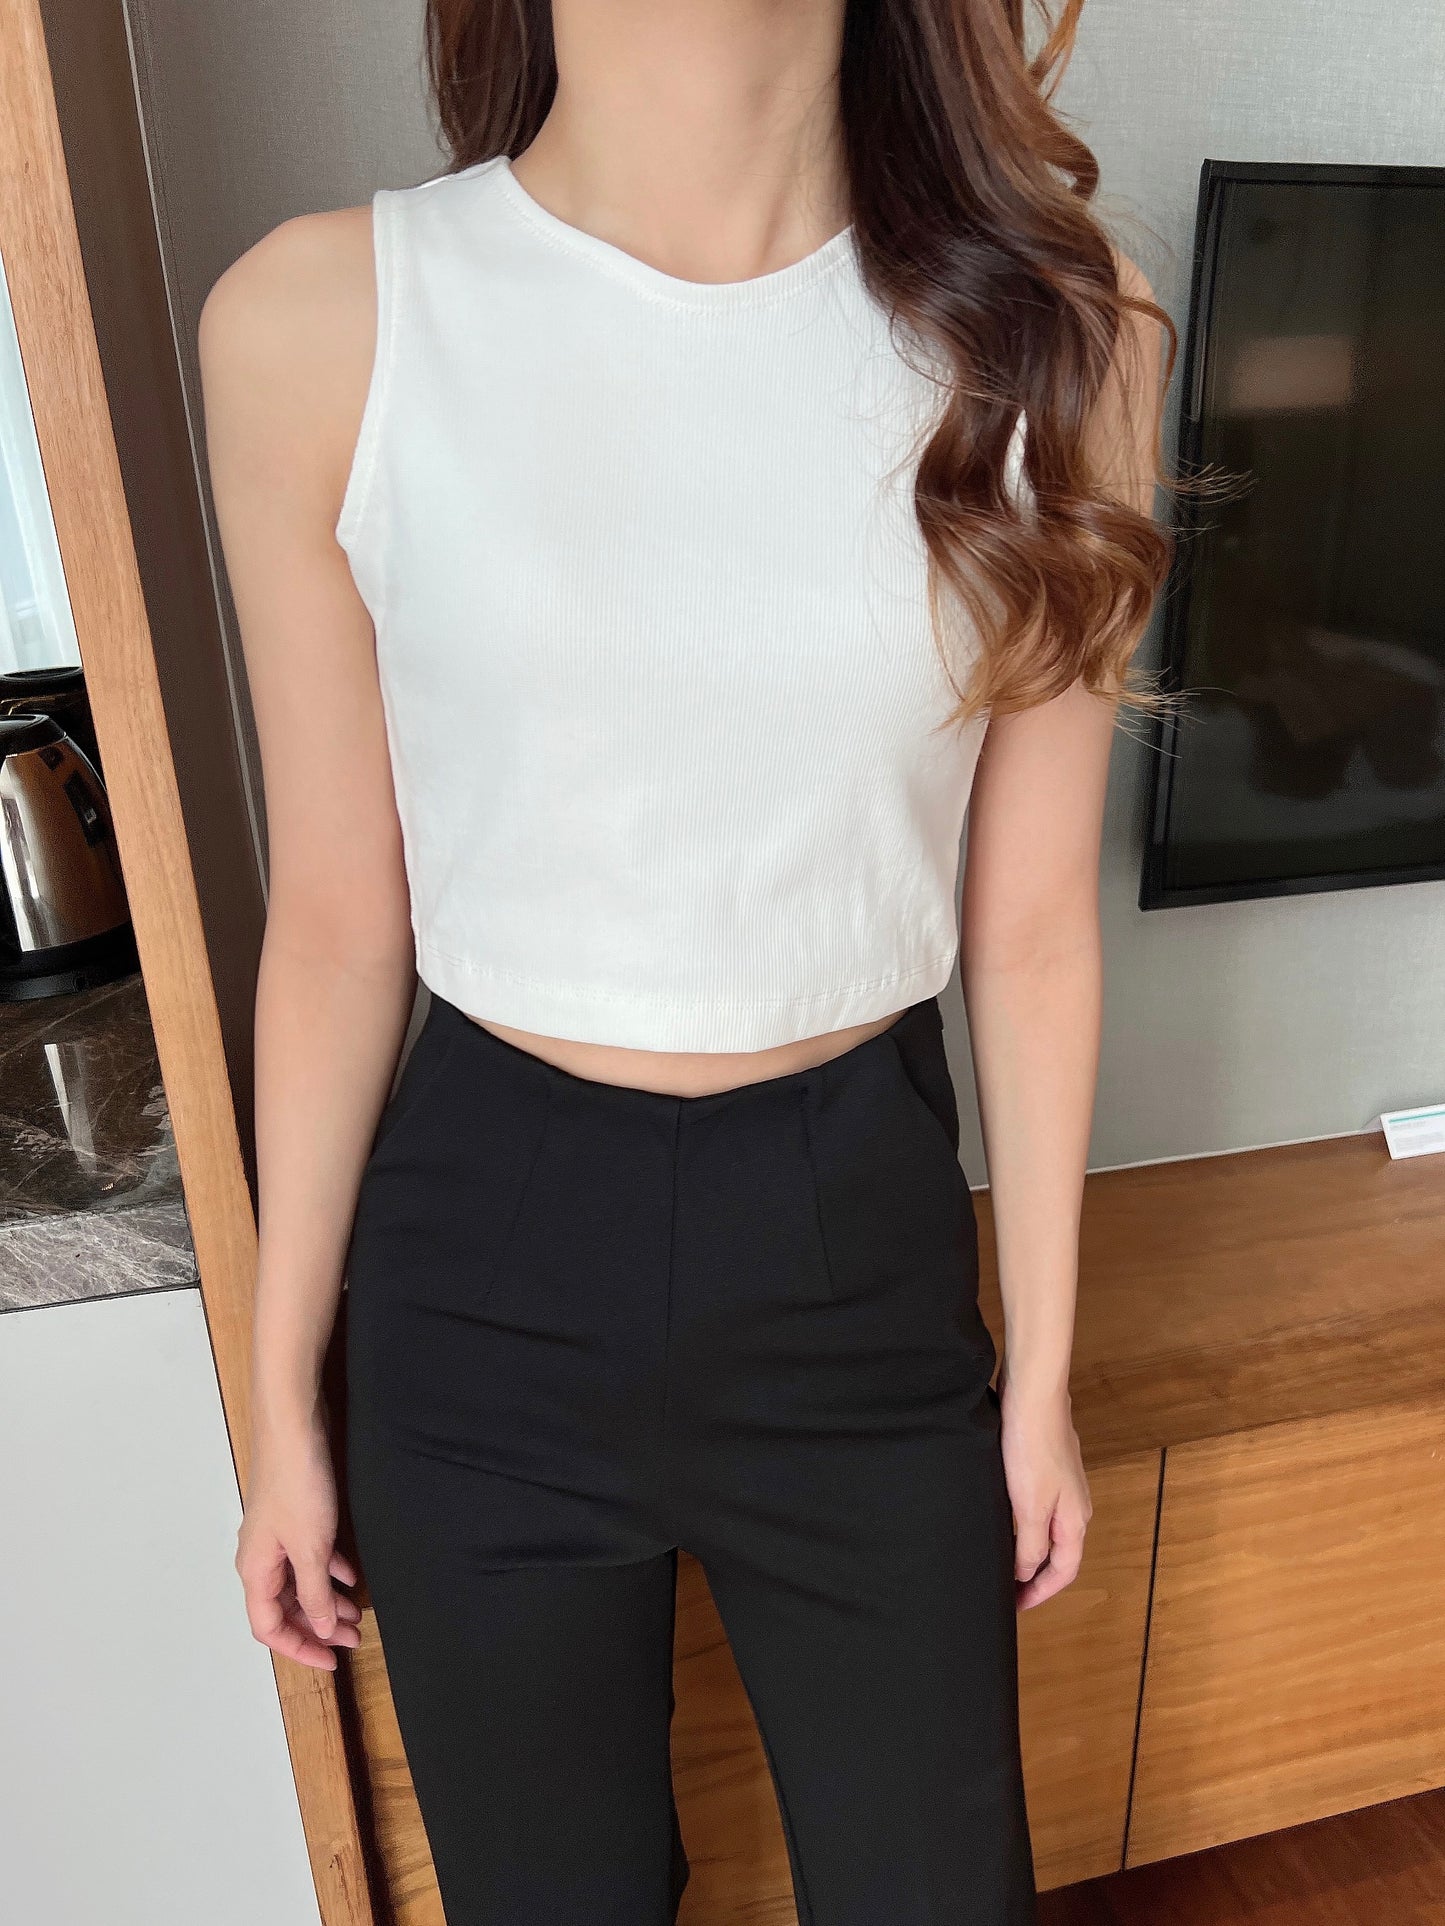 Eve sleeveless Crop Top in White